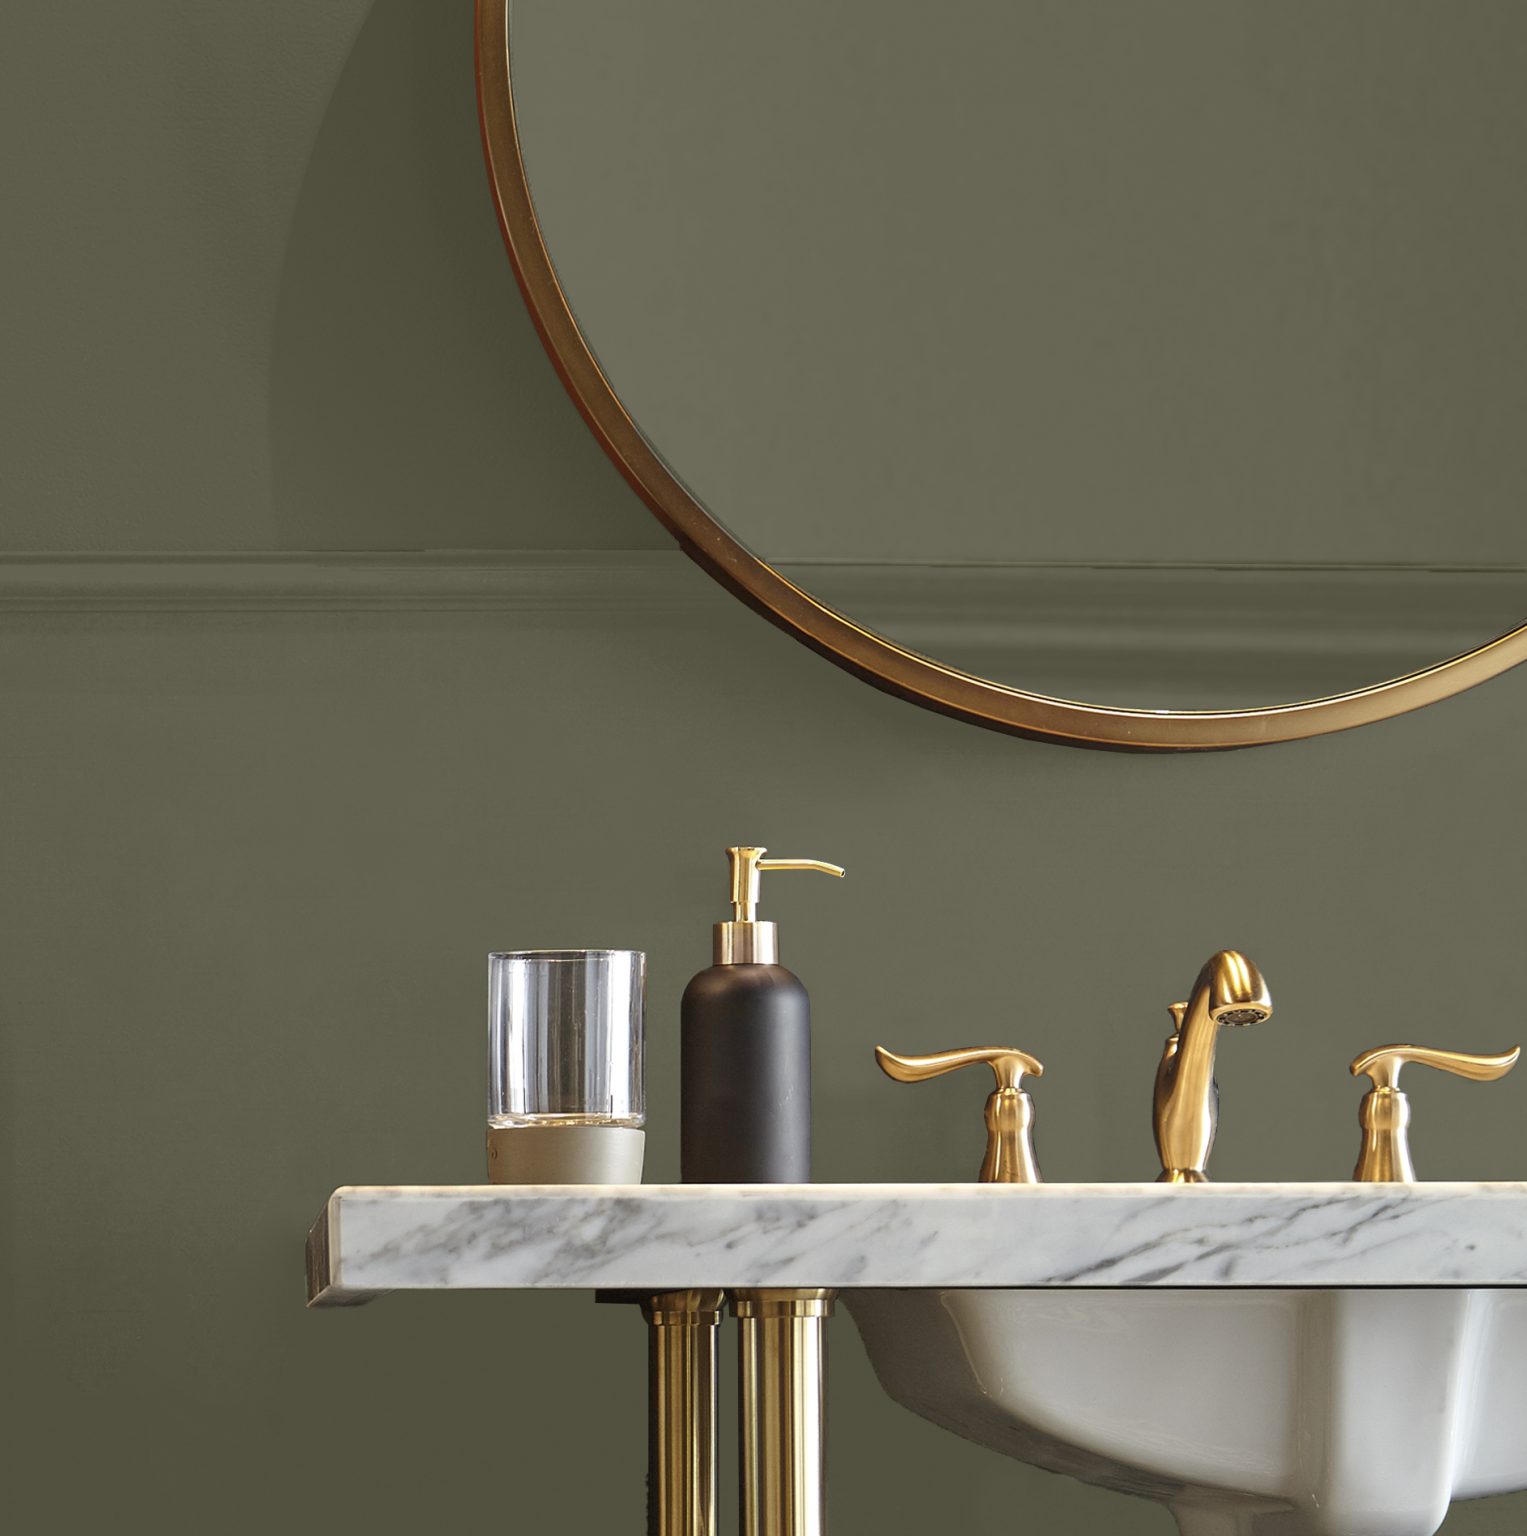 A closeup of a bathroom with the walls painted in a deep olive green and styled with gold hardware and décor